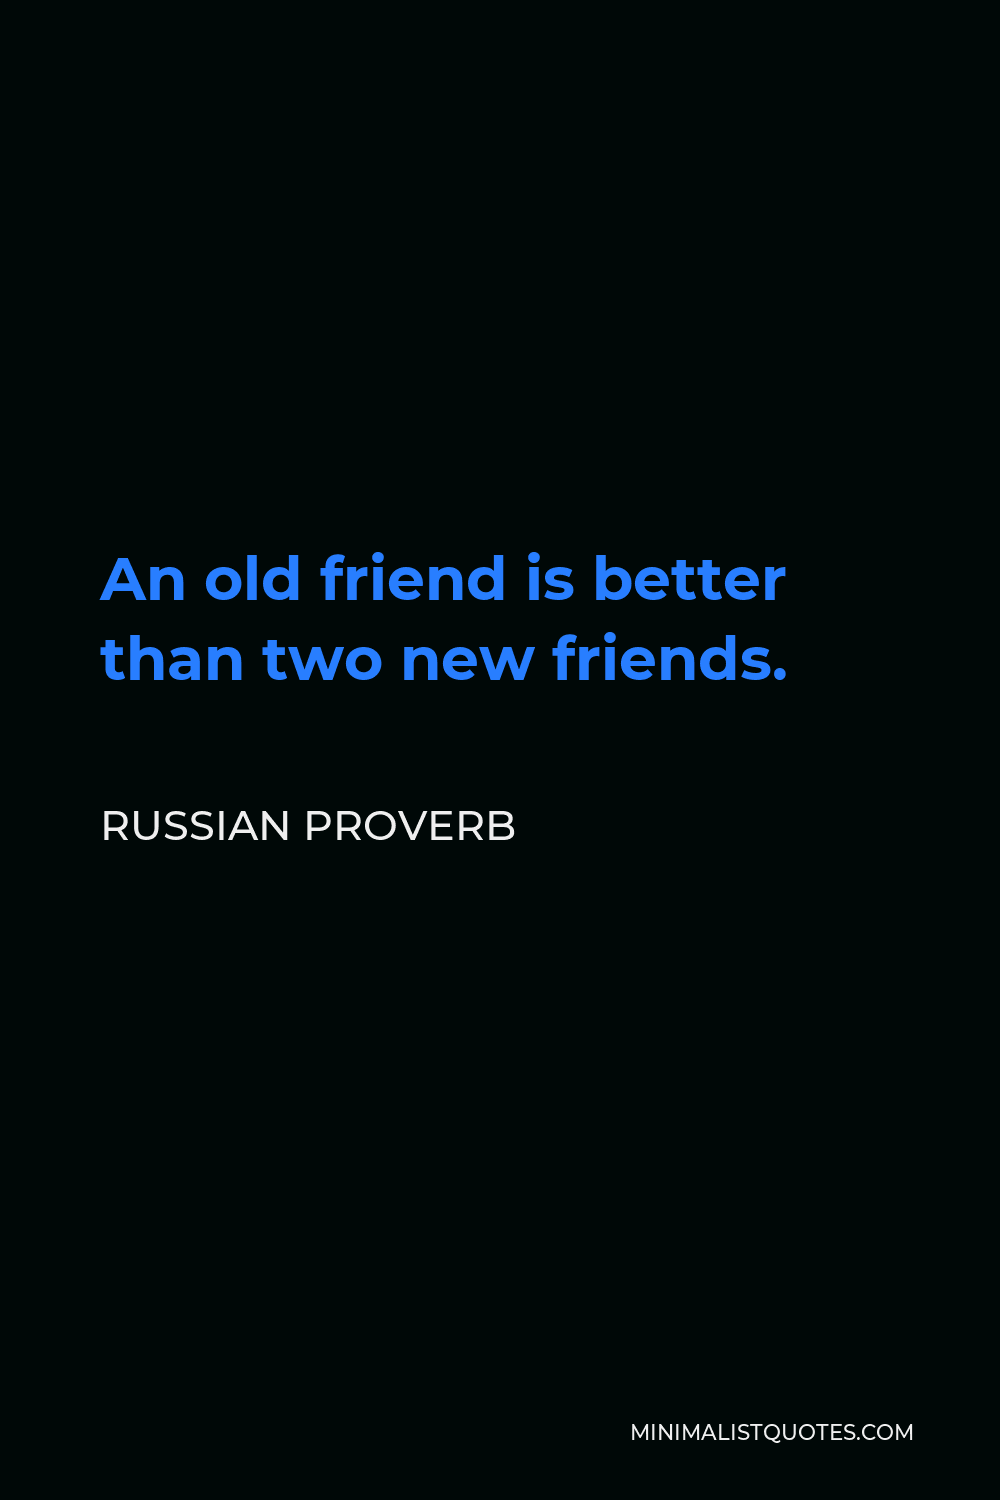 Russian Proverb Quote - An old friend is better than two new friends.